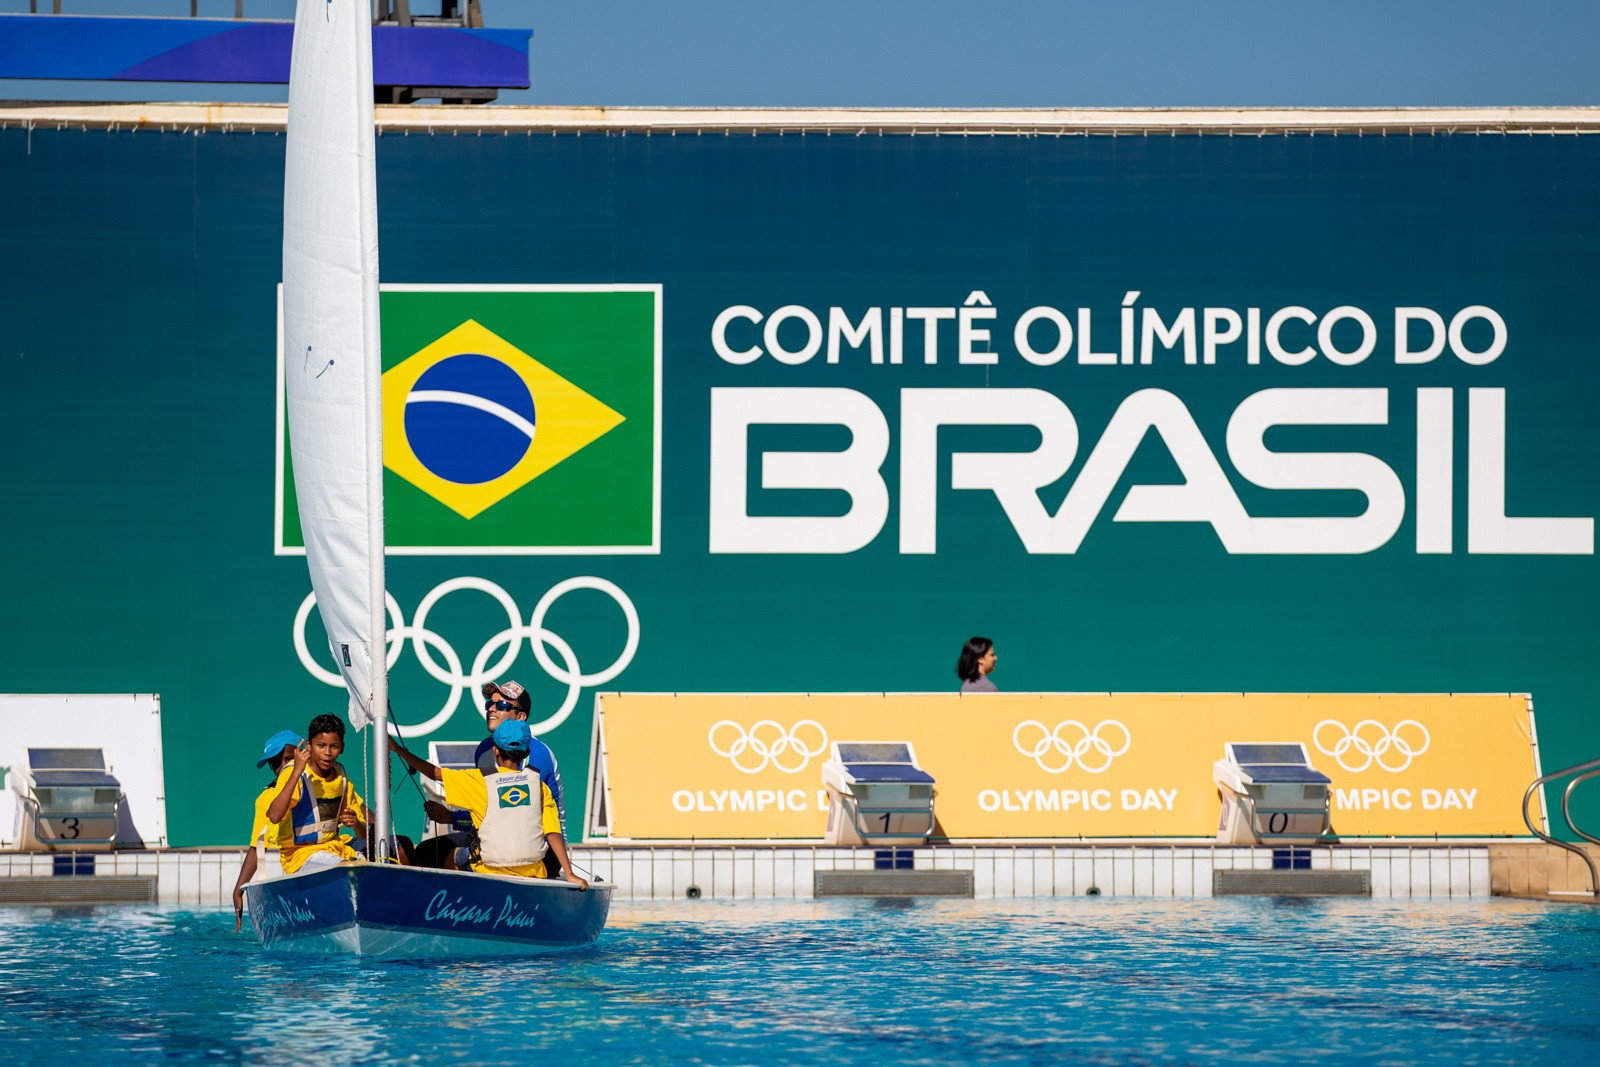 Brazilian Olympic Committee organises sports activities in celebration of Olympic Day